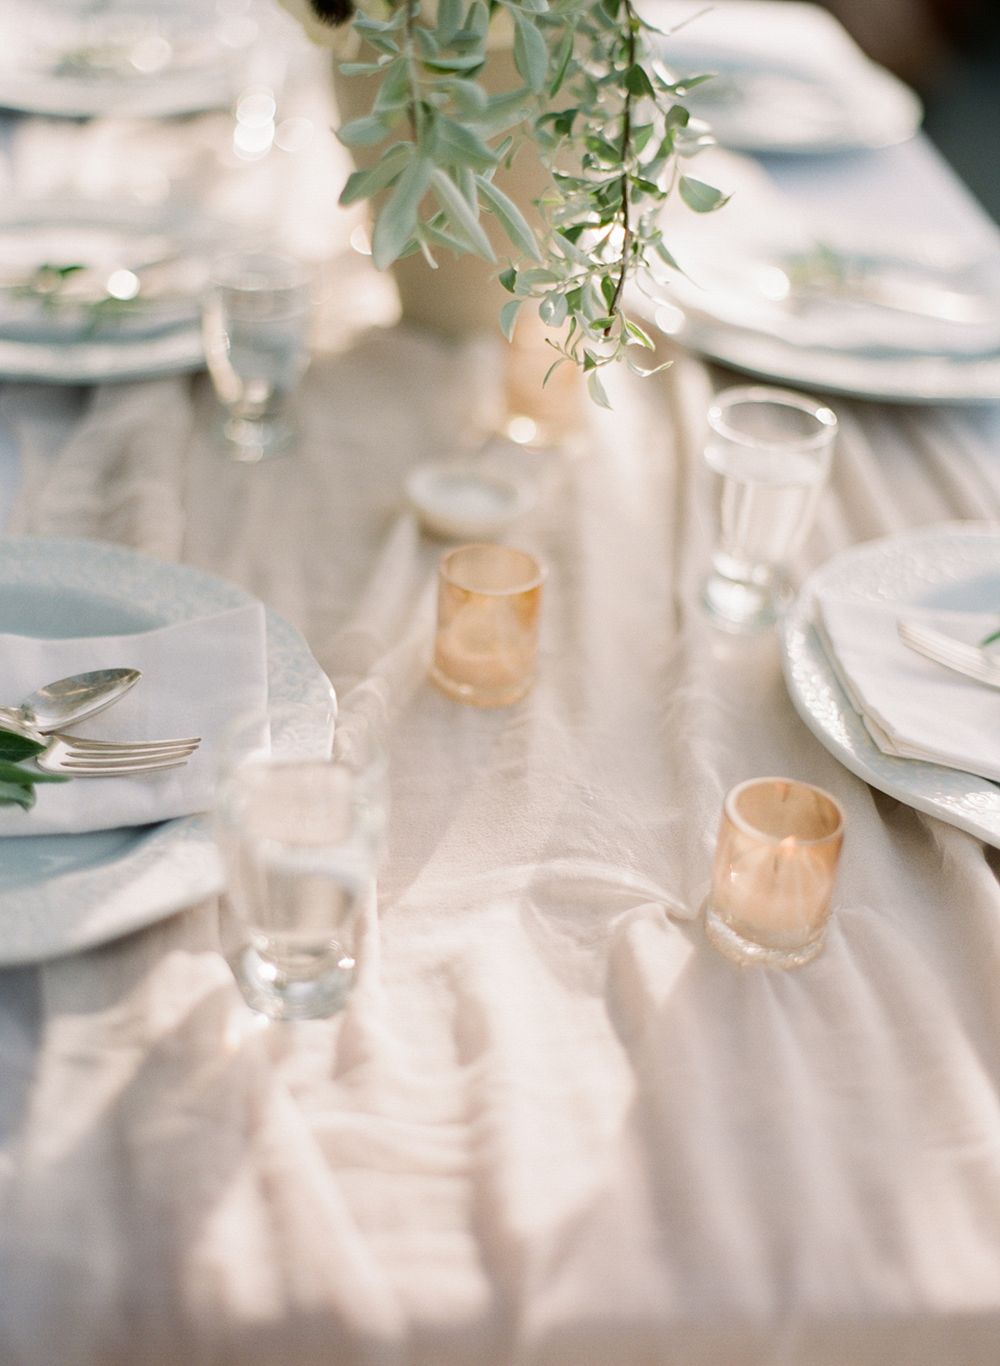 Ethereal Greece Bridal Inspiration with a Blue Dress